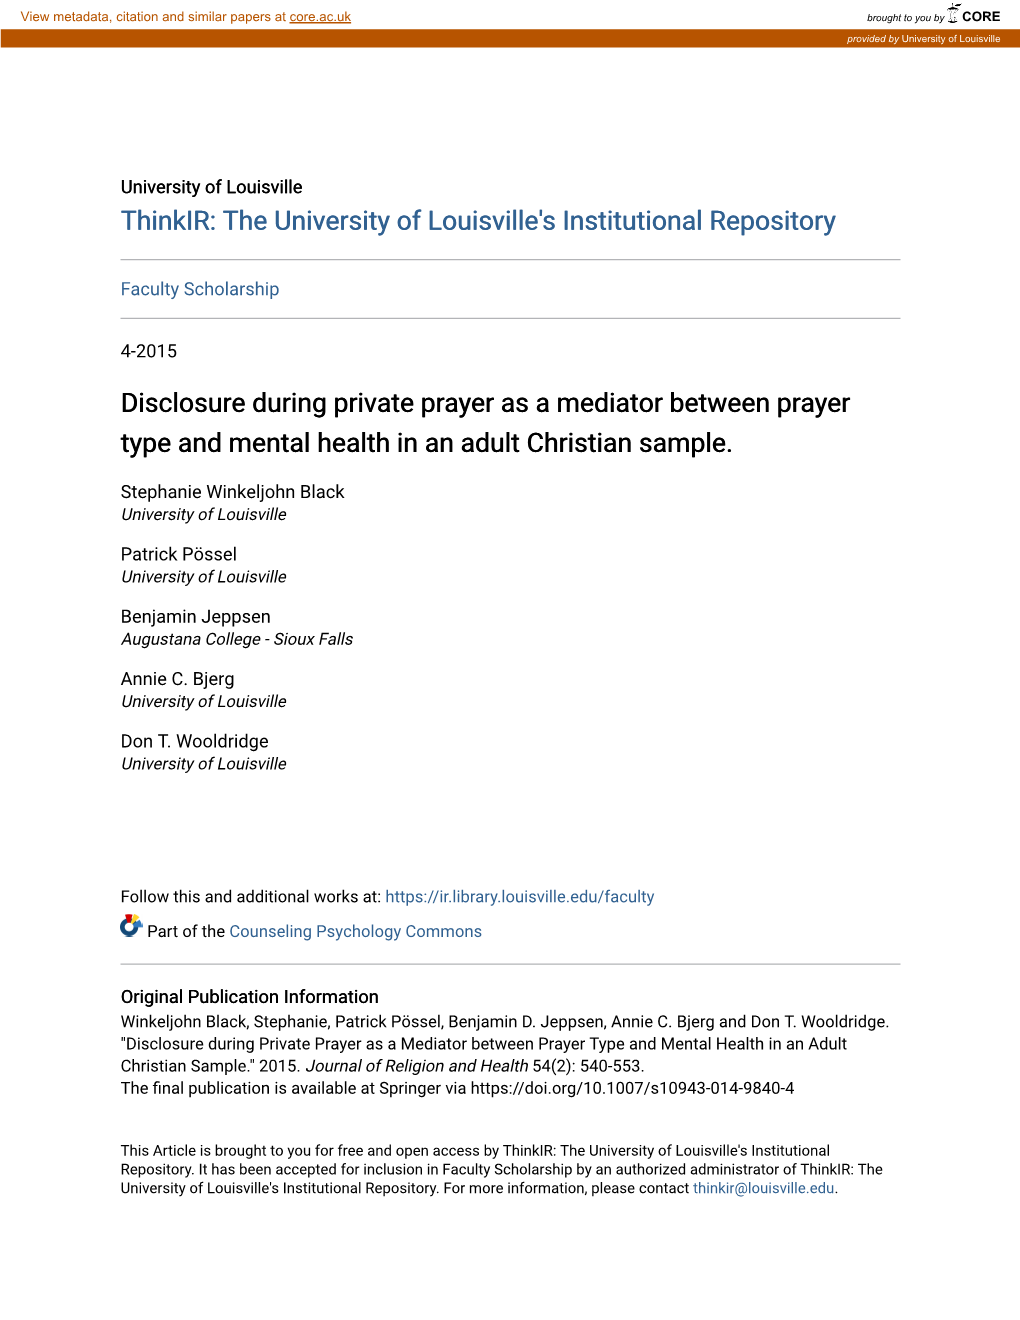 Disclosure During Private Prayer As a Mediator Between Prayer Type and Mental Health in an Adult Christian Sample